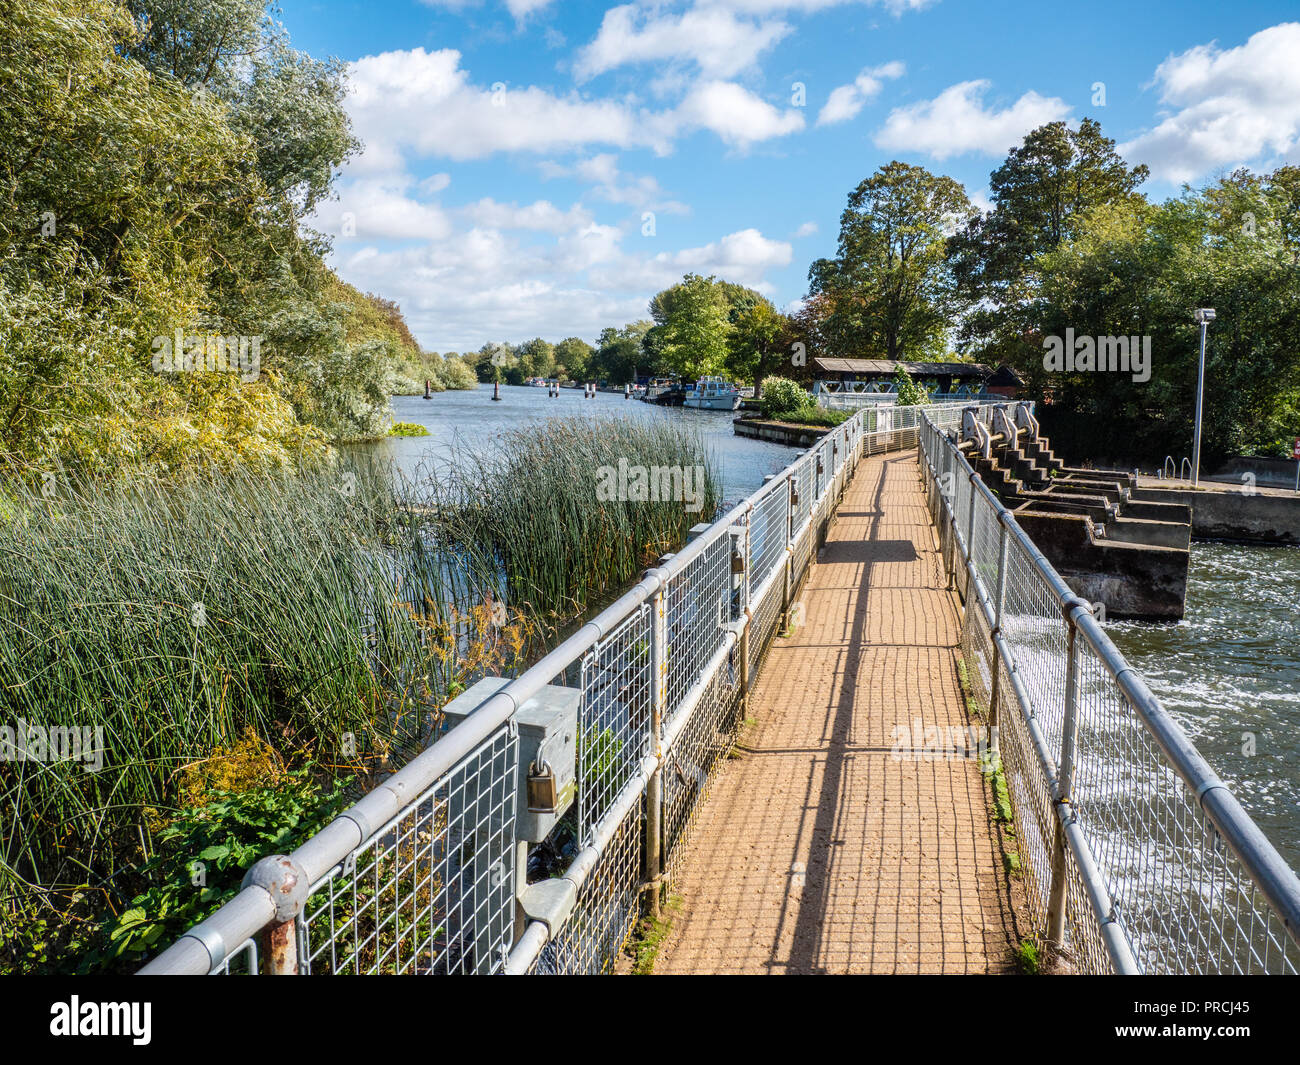 Weir With Footpath, Thames Path at Abingdon Lock, River Thames, Abingdon, Oxfordshire, England, UK, GB. Stock Photo